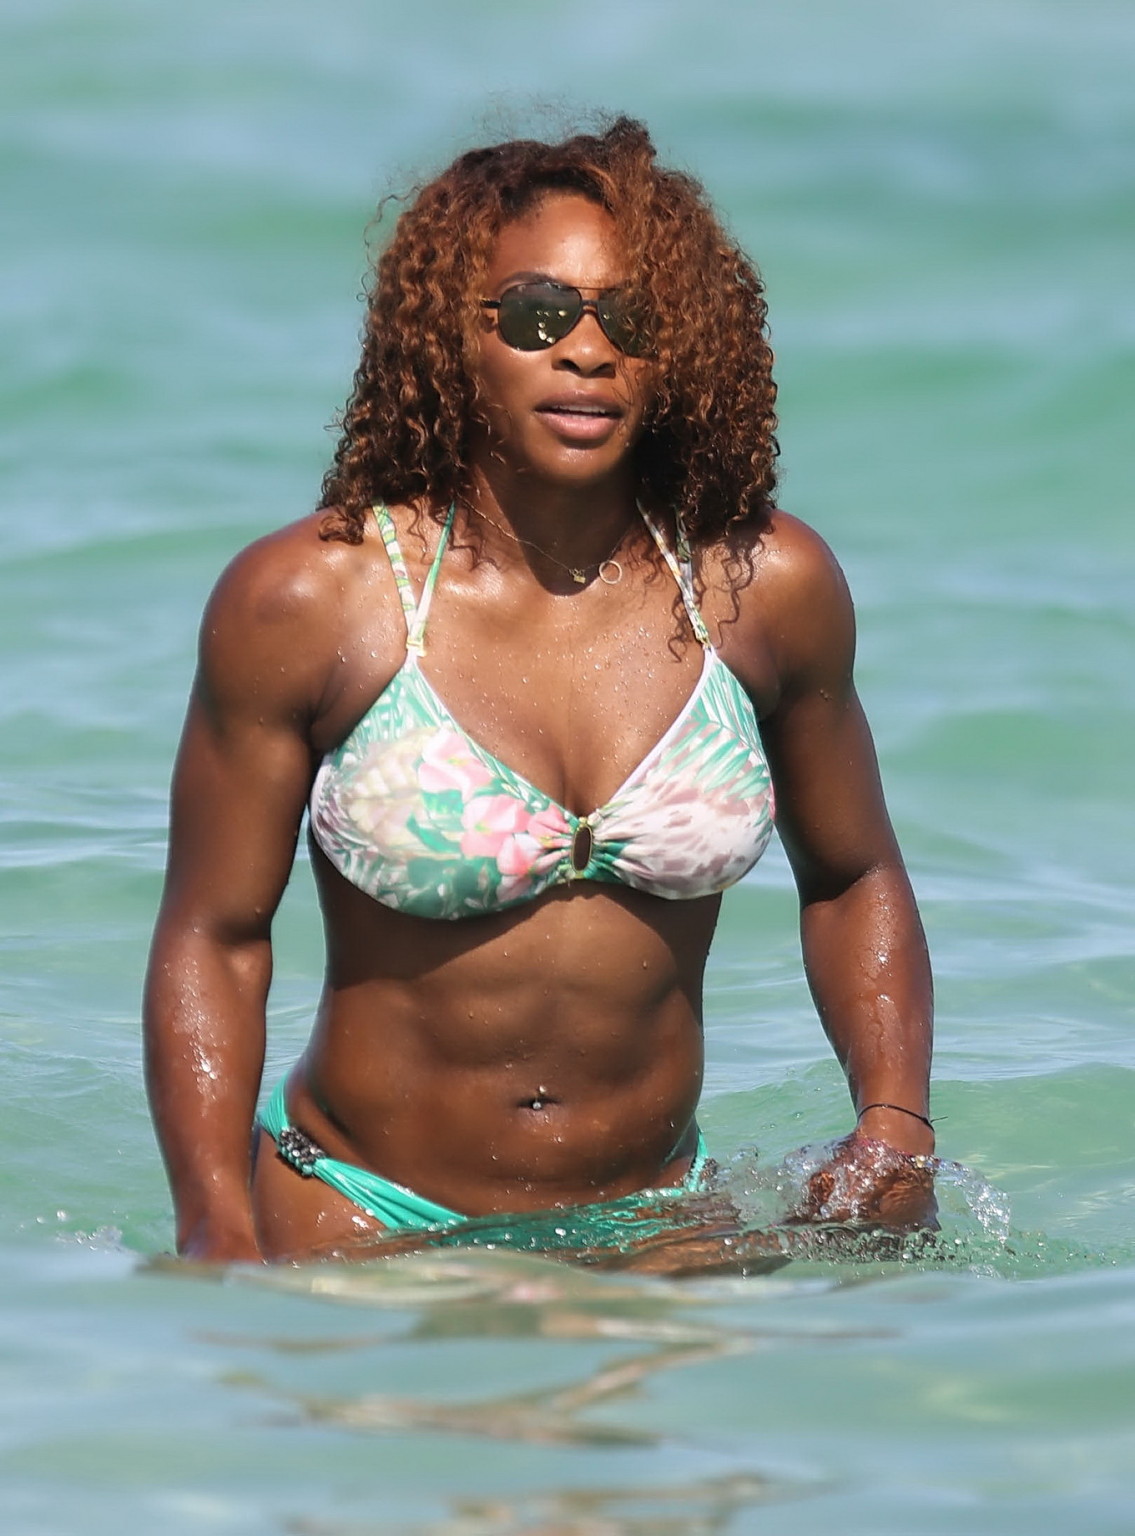 Serena Williams showing off her bikini curves at the beach in Miami #75228641